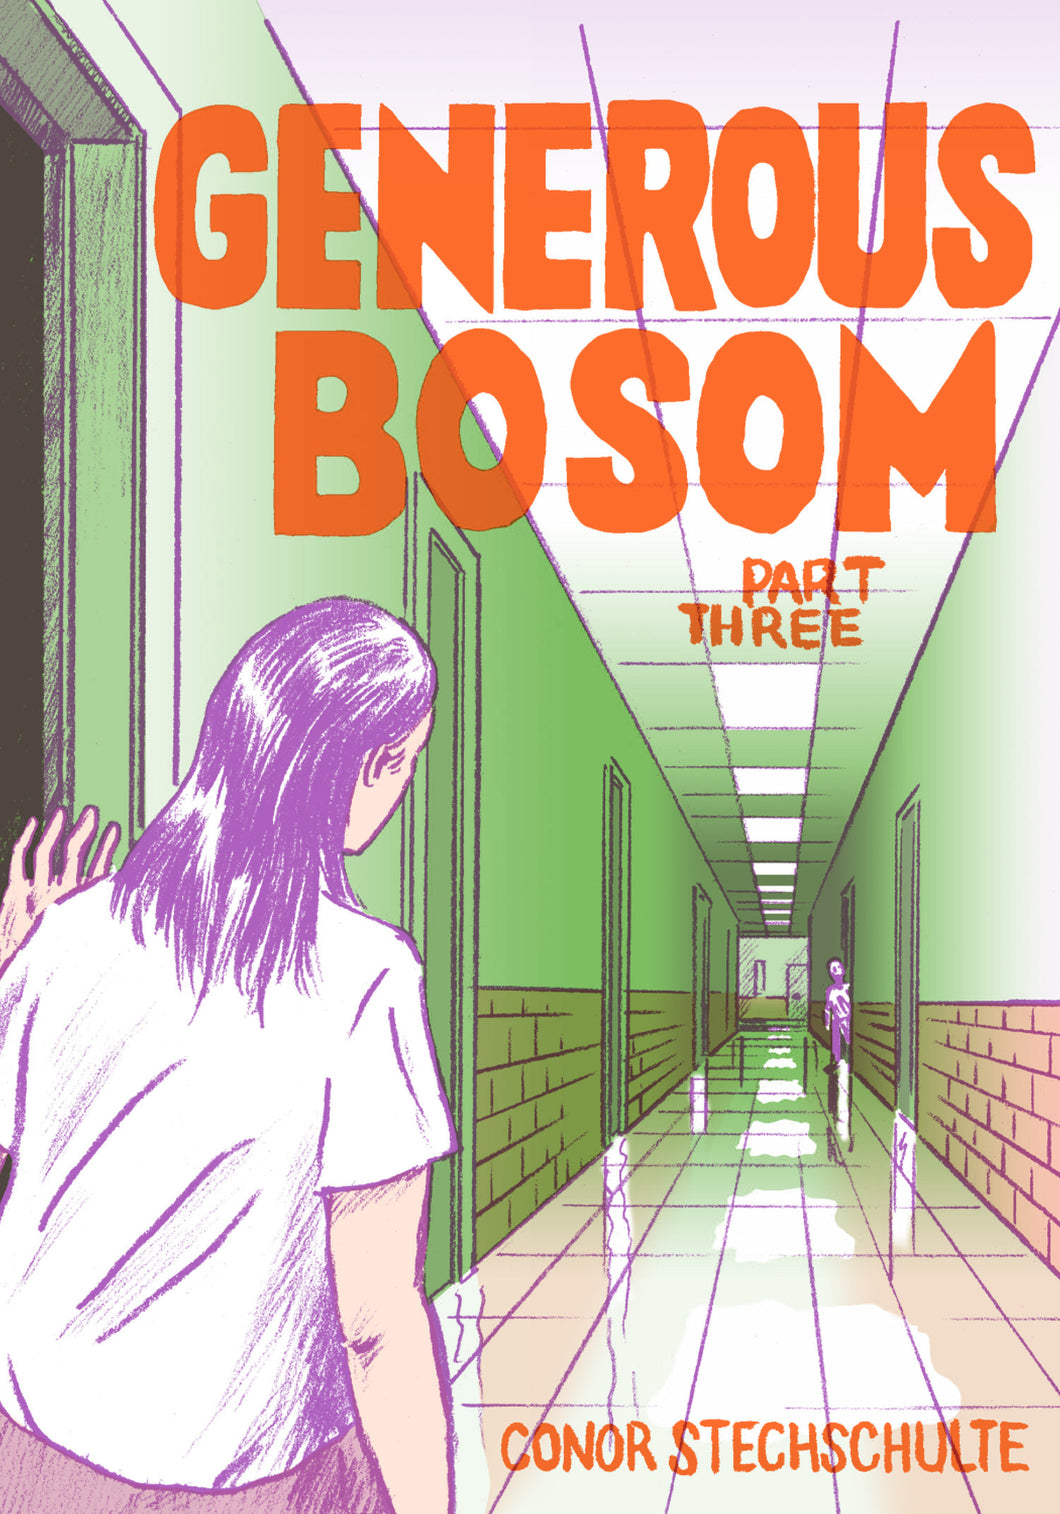 Generous Bosom 3 by Conor Stechschulte